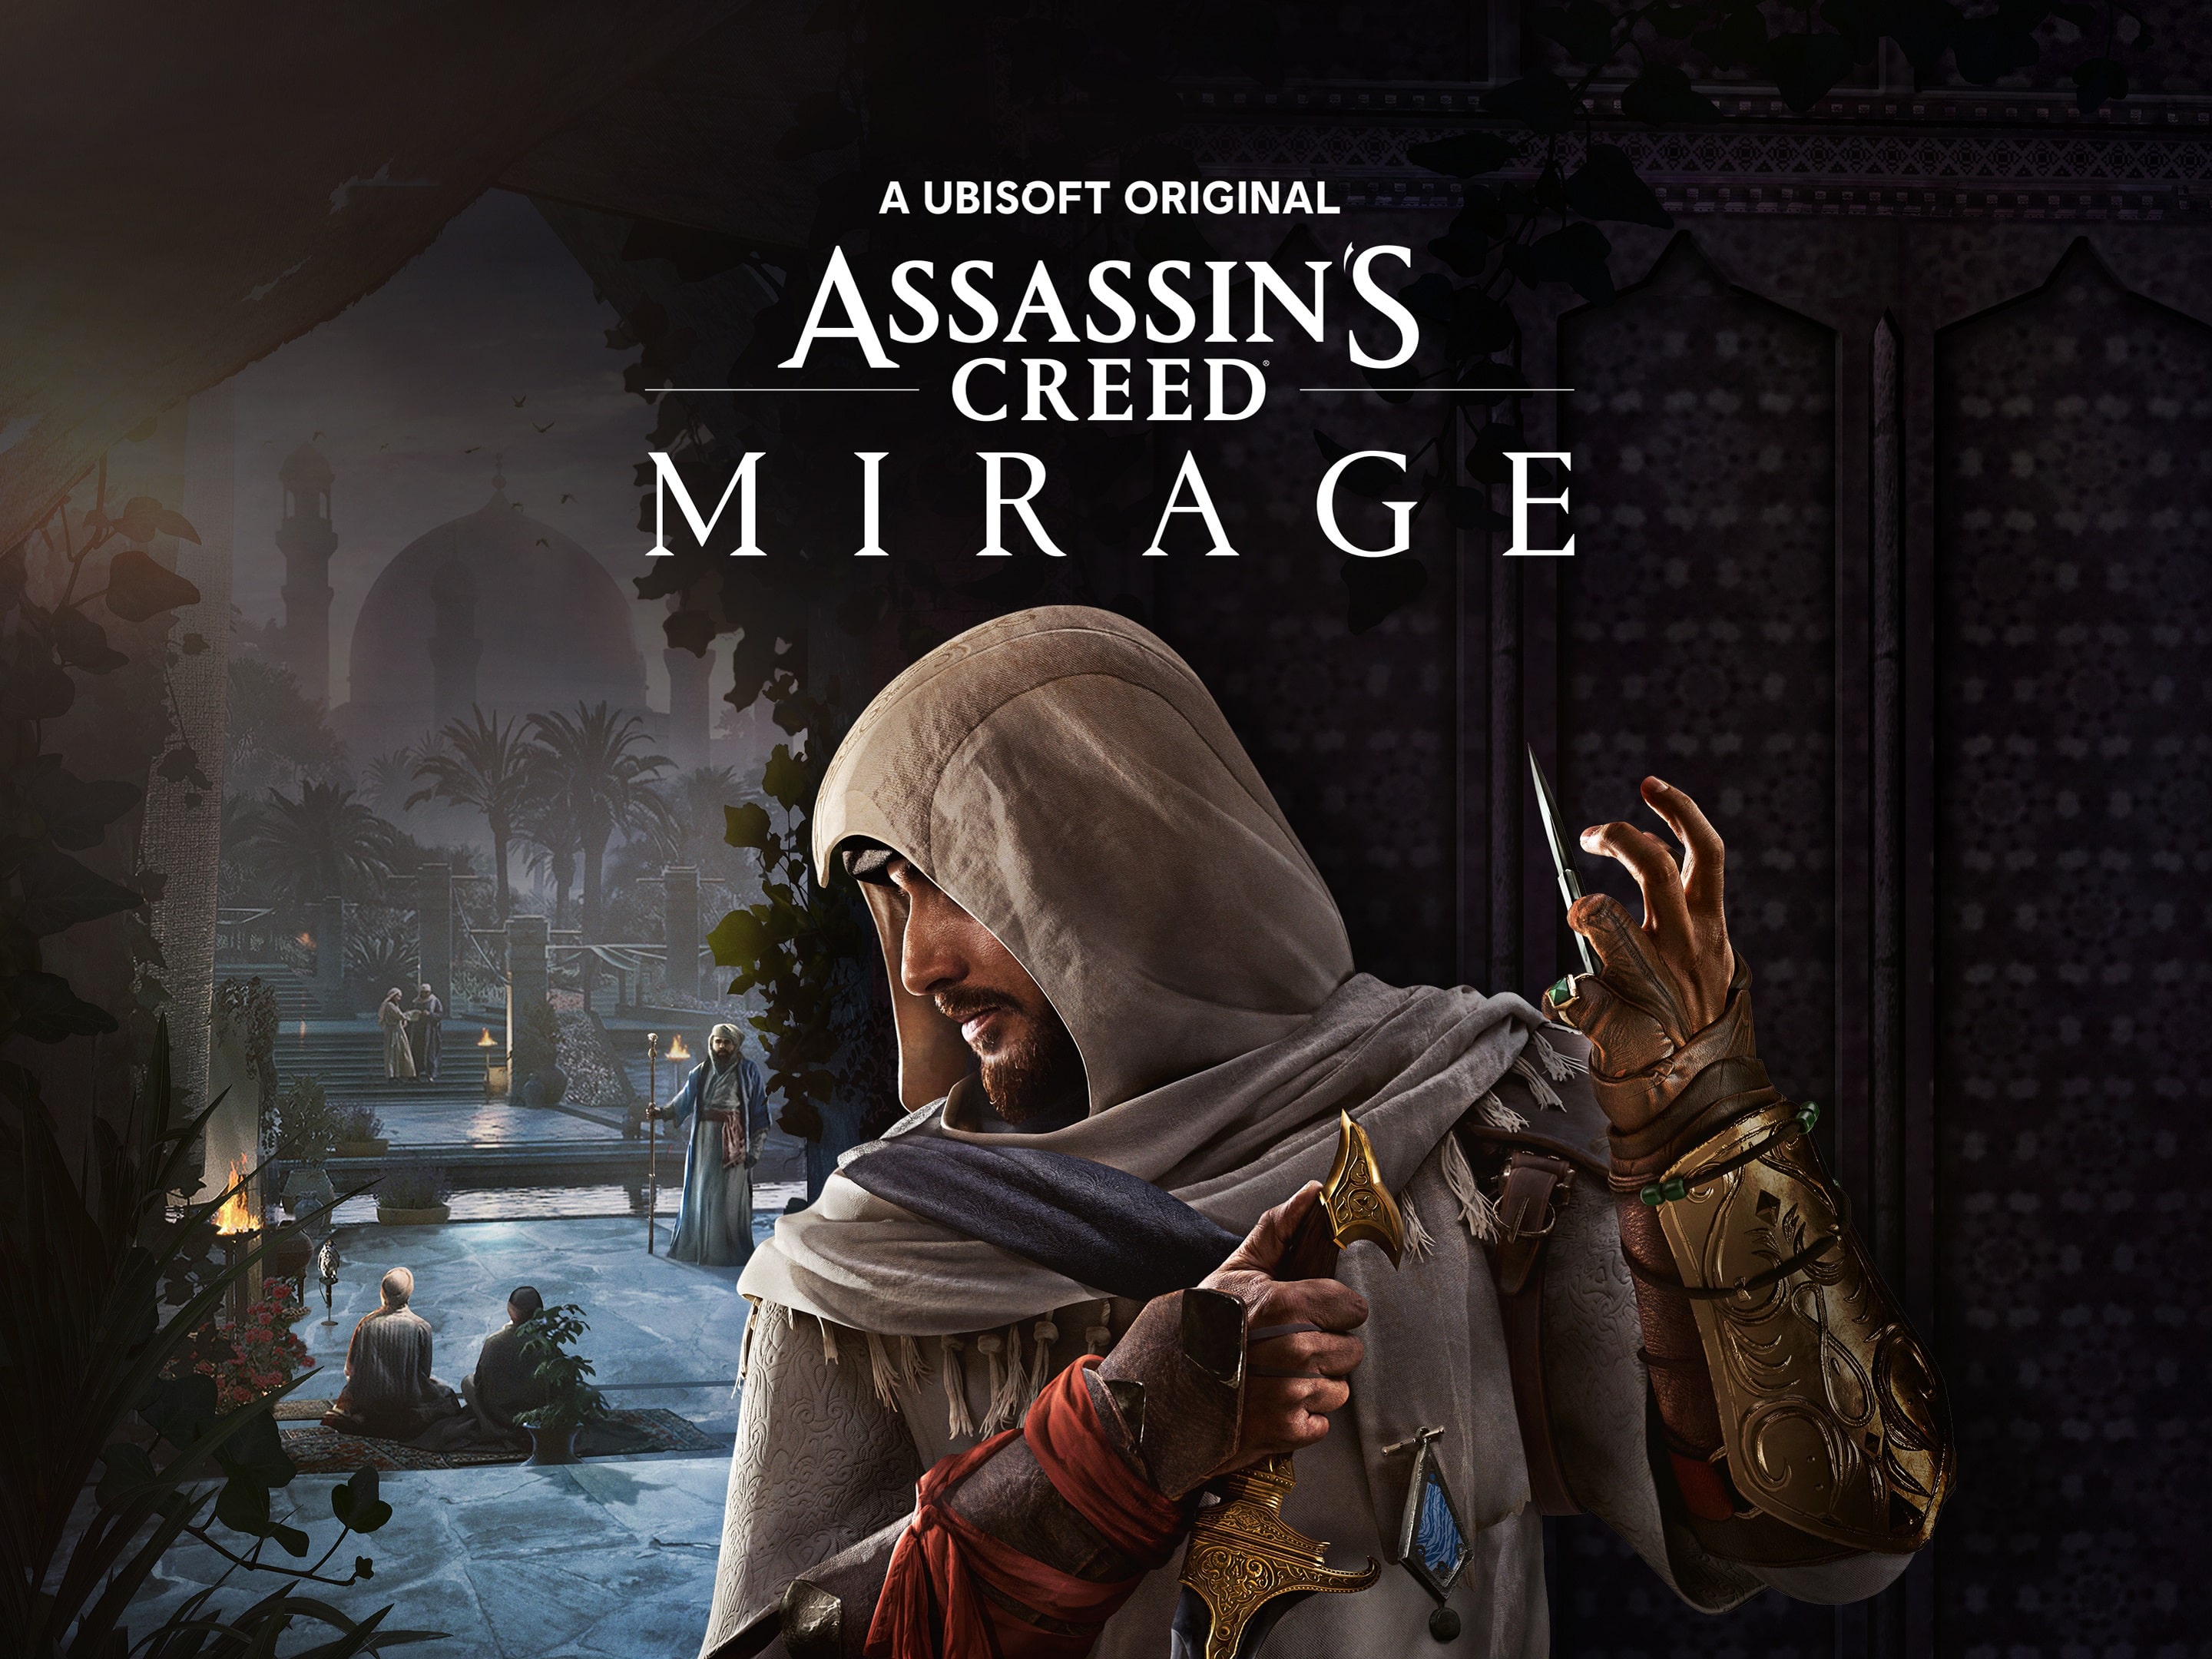 Ubisoft Game Sale (PC Digital/Xbox/PlayStation): Assassin's Creed Mirage $40, Immortals Fenyx Rising $9, Rainbow Six Siege: Deluxe Edition $9.90 & More